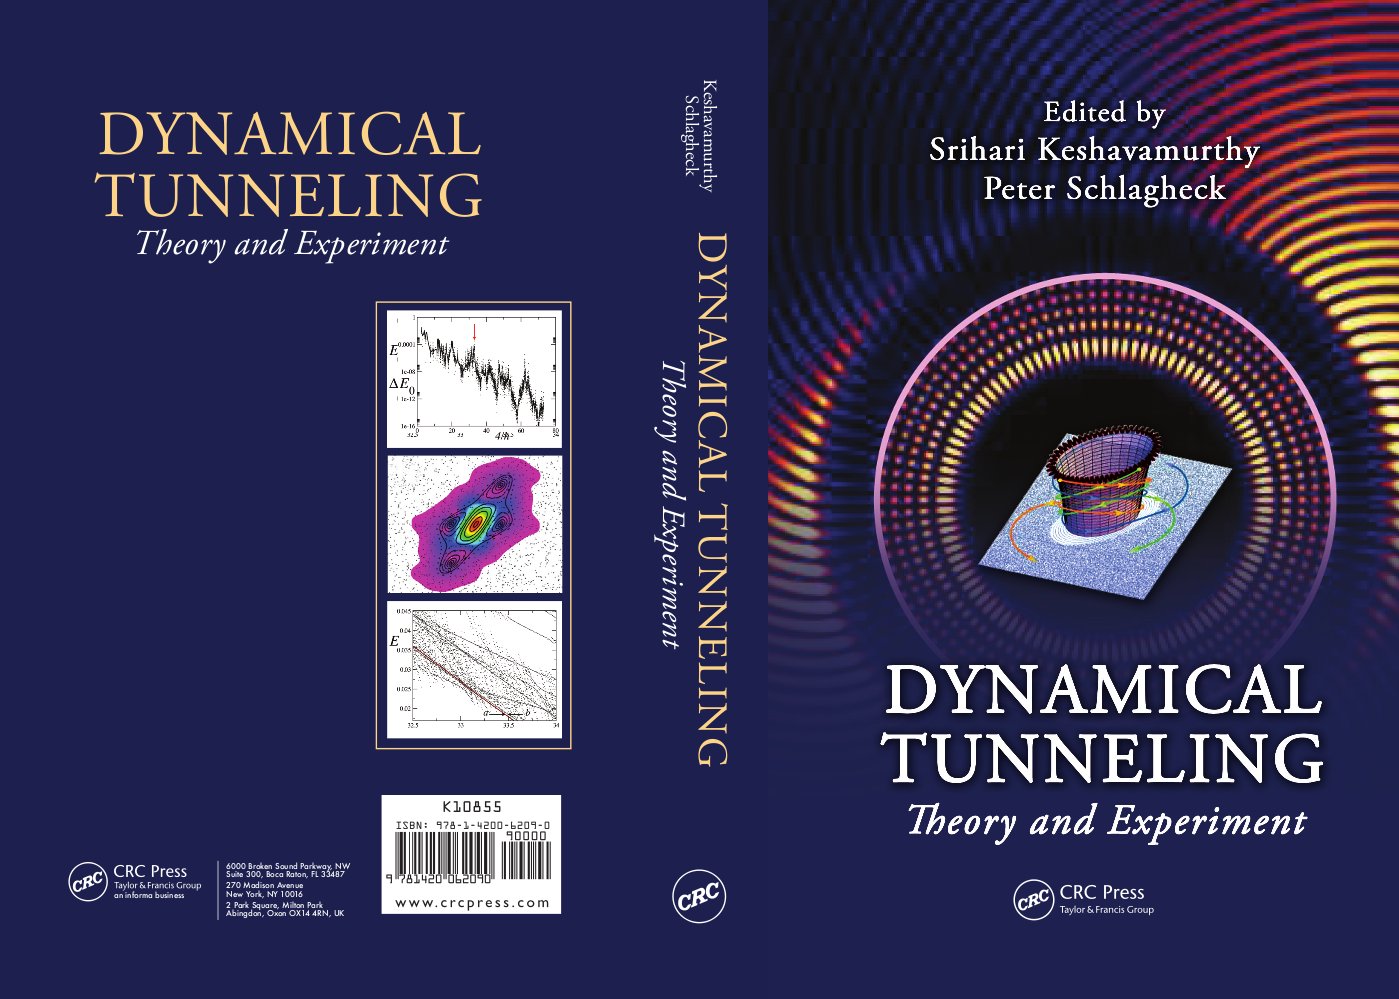 Dynamical Tunneling - Theory and experiment